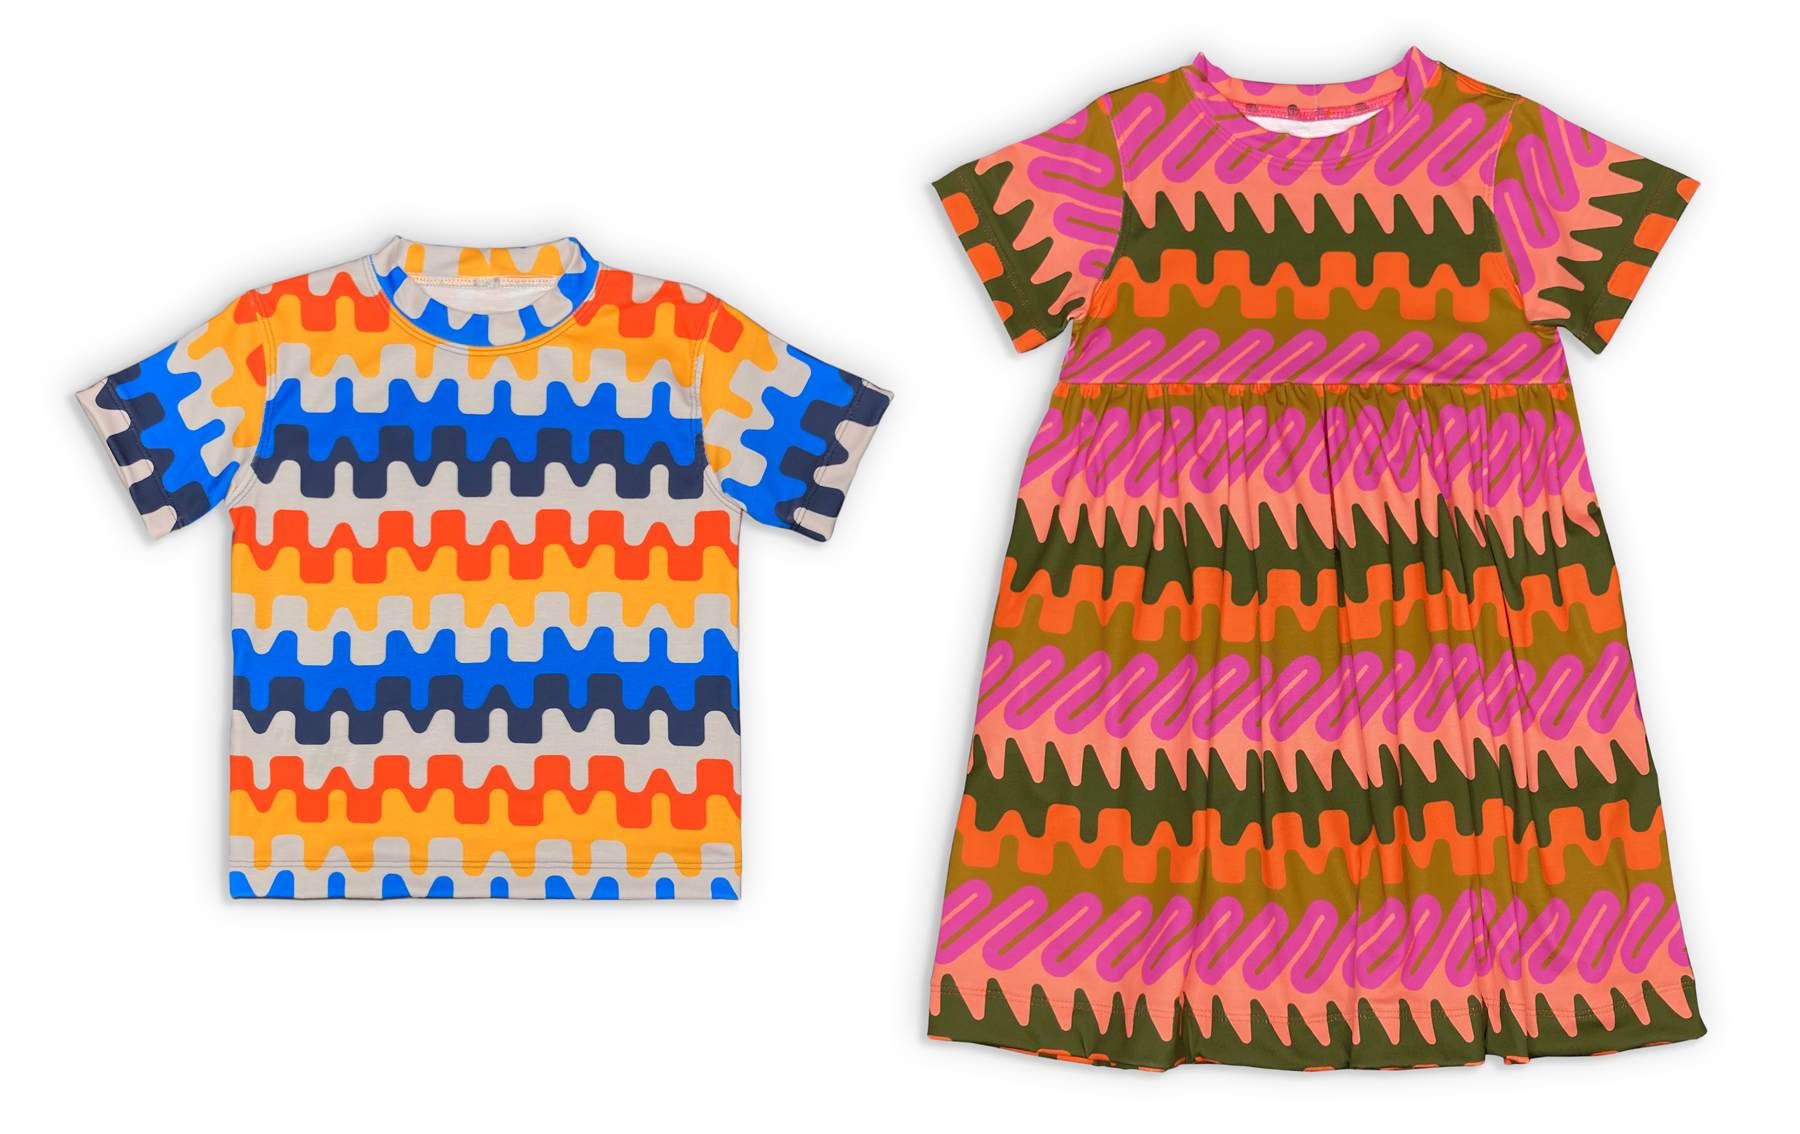 T-shirt in Mama Square pattern in Racecar, Dress in Frequencies (key pattern) in Neon Earth Tones